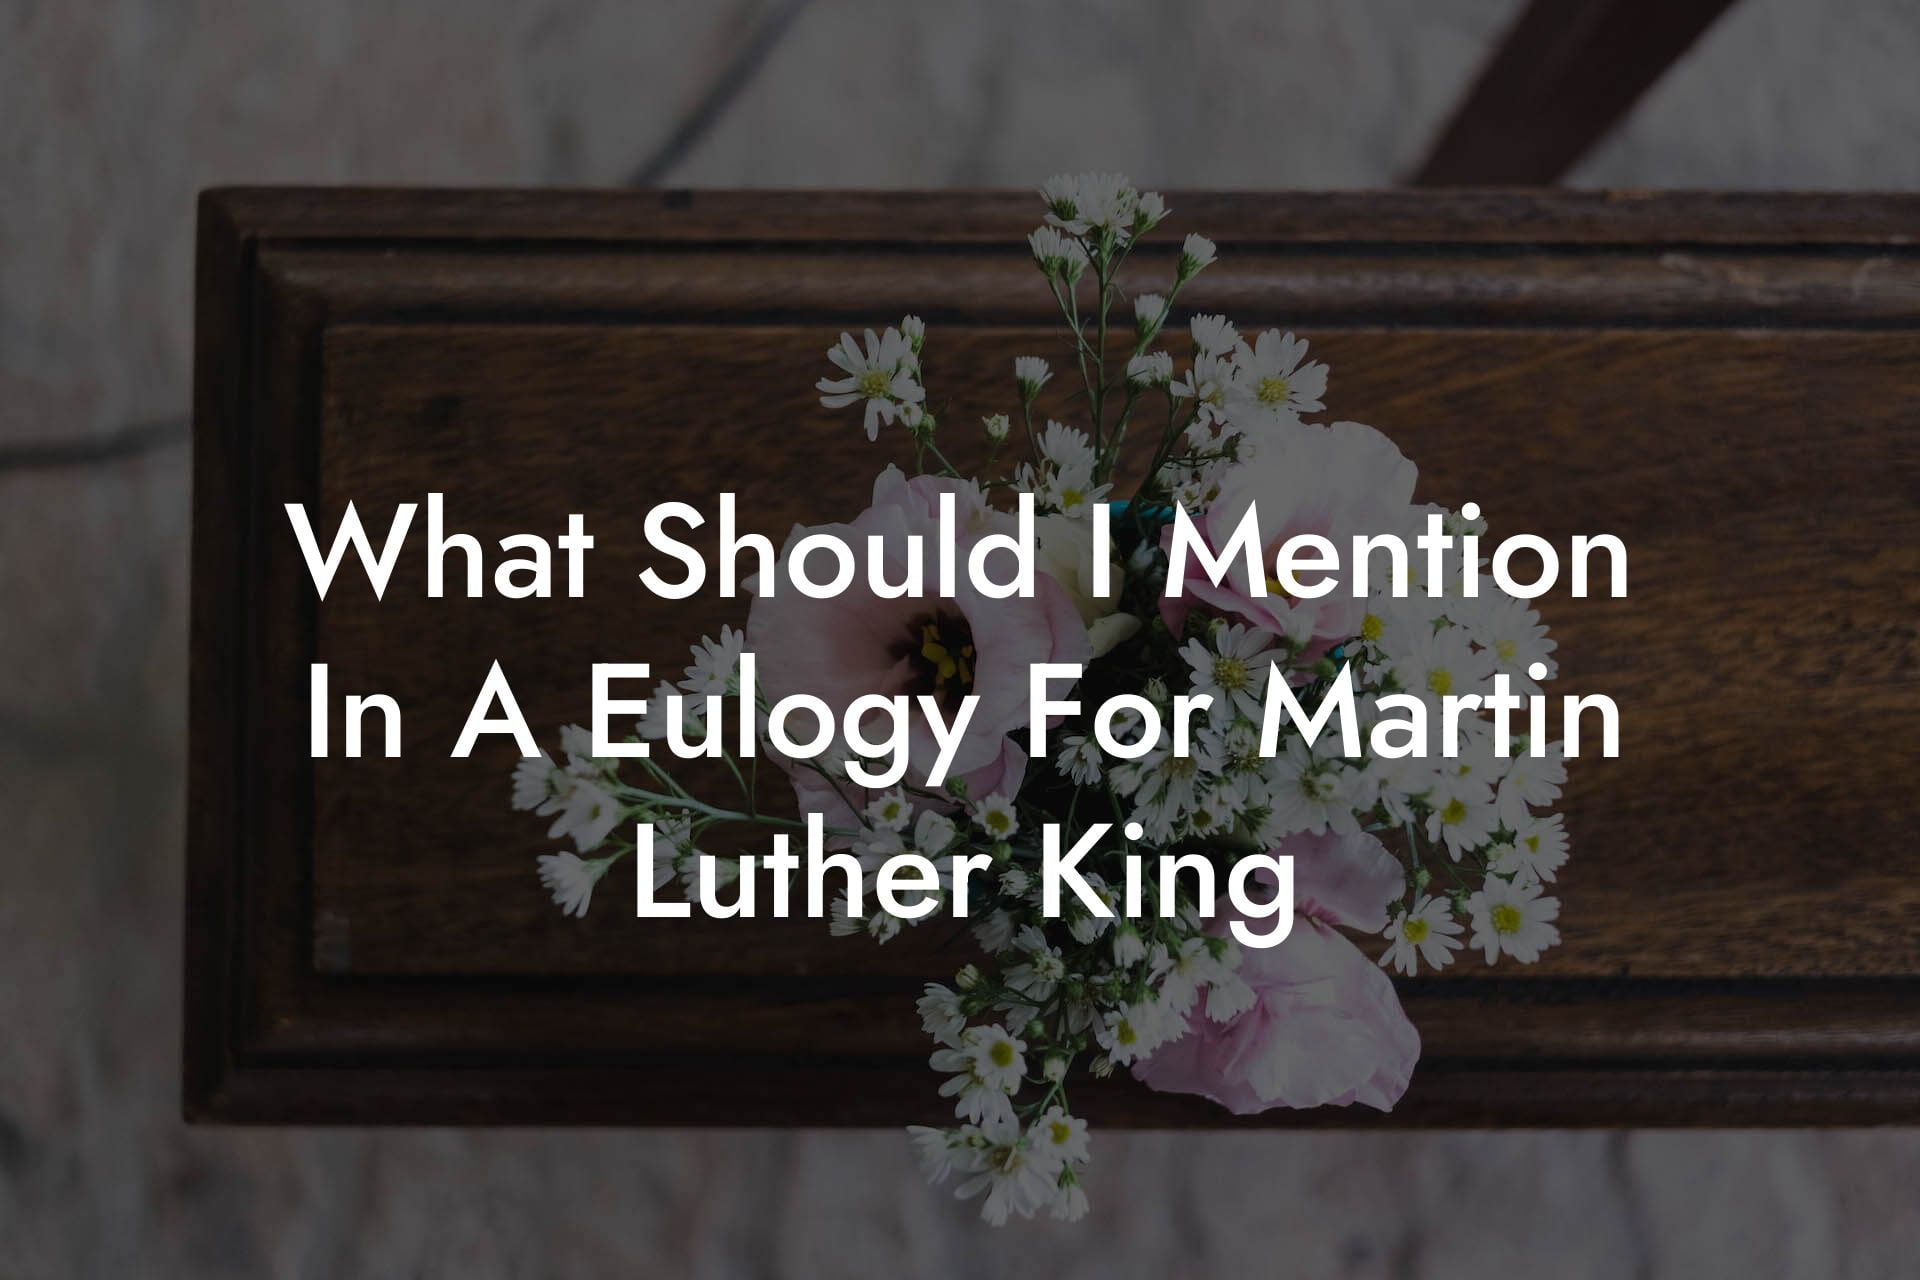 What Should I Mention In A Eulogy For Martin Luther King